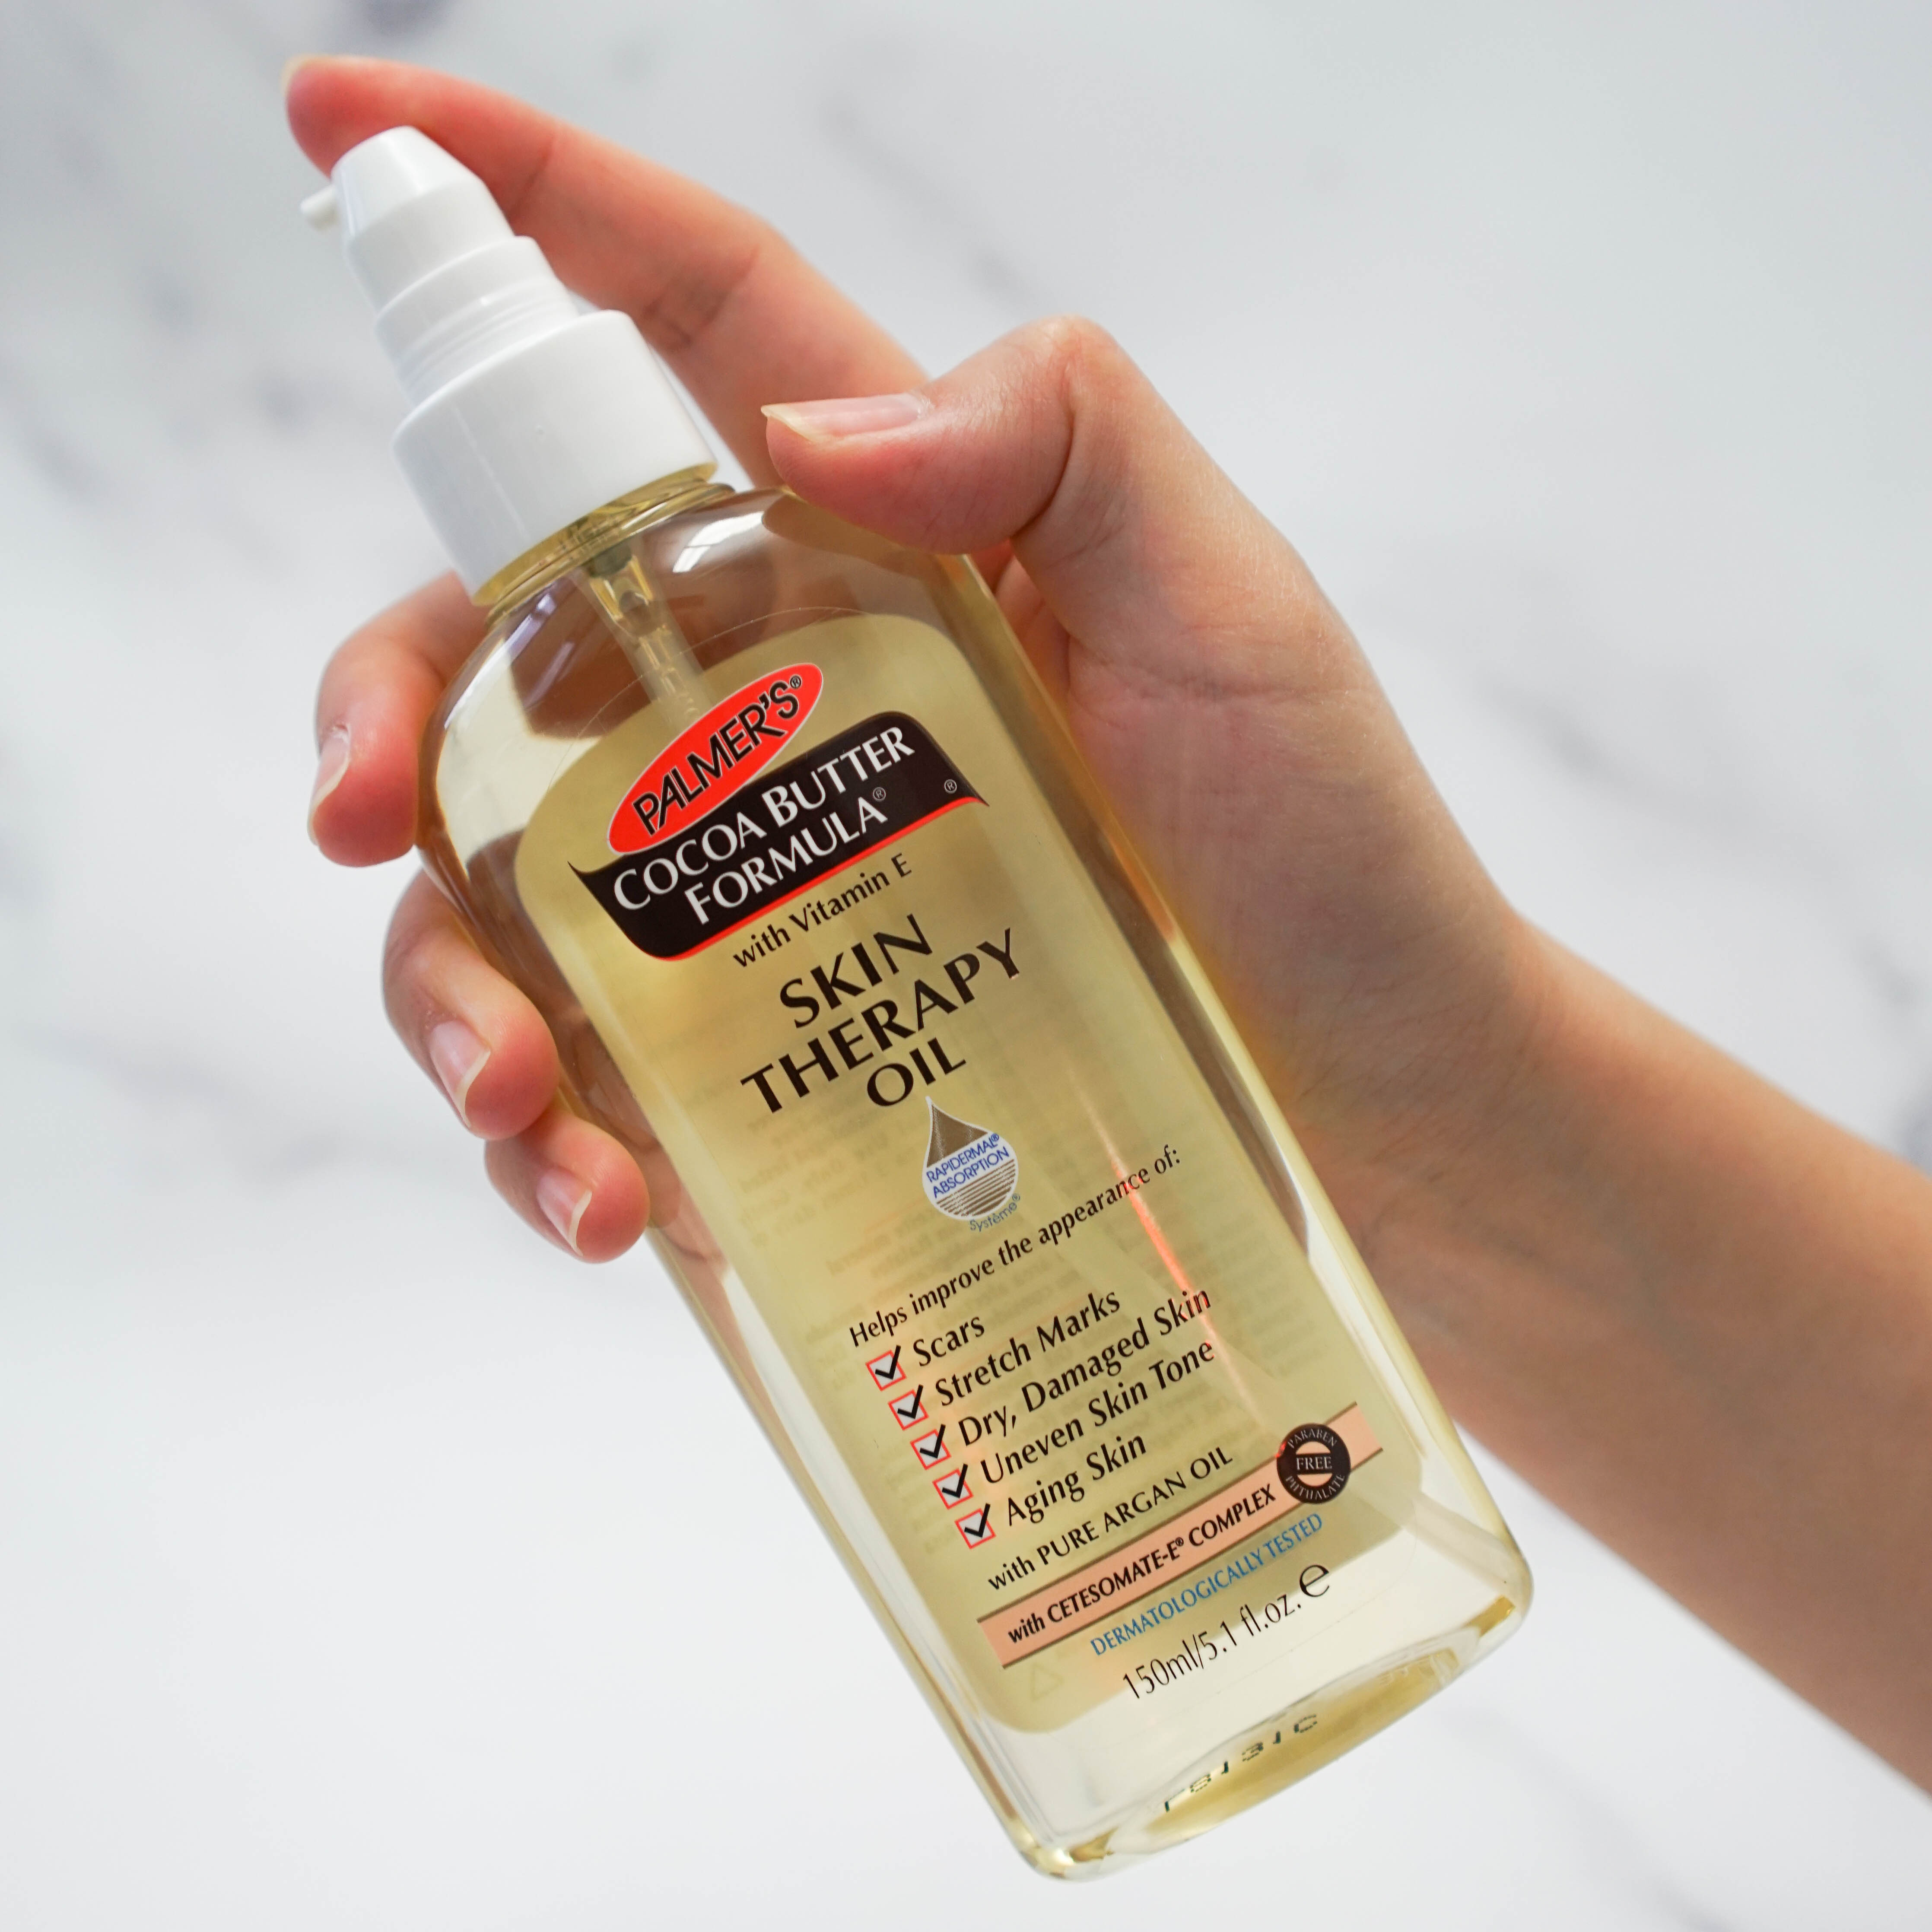 Winter skin care tips using Palmer's Cocoa Butter Skin Therapy Oil